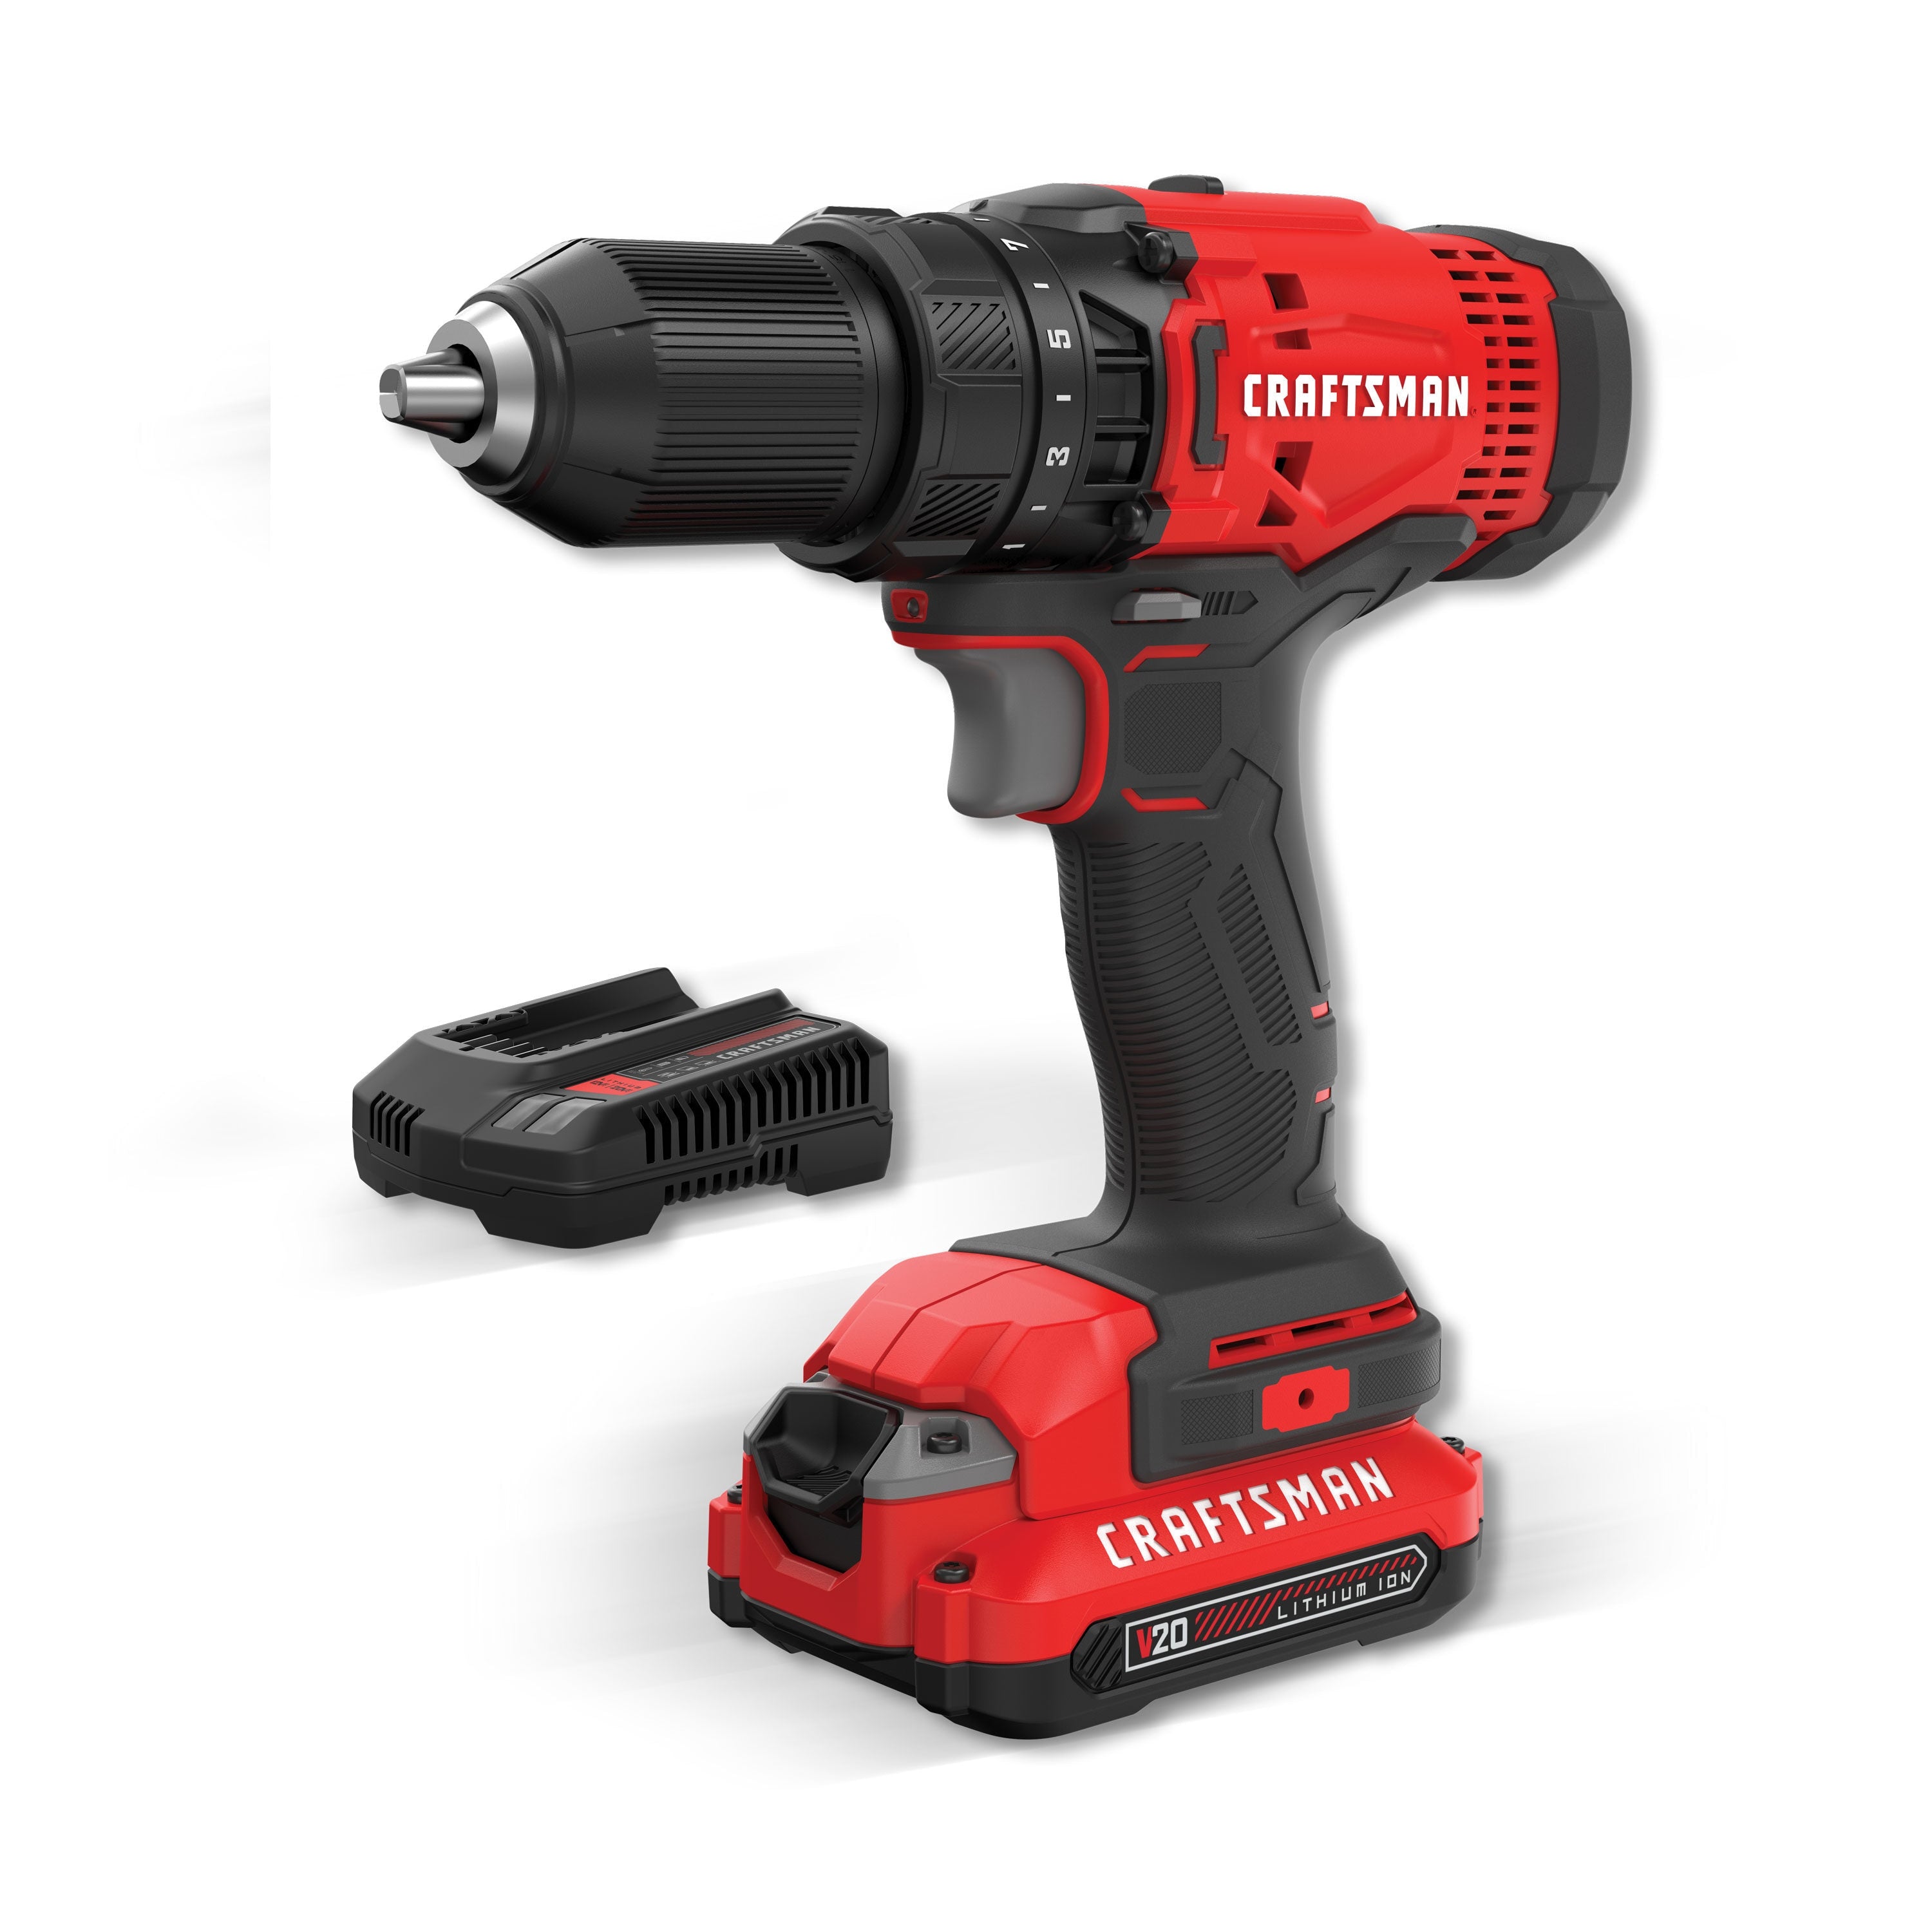 CRAFTSMAN  20-Volt Max 1/2-In Cordless Drill(1 Li-Ion Battery Included and Charger Included)